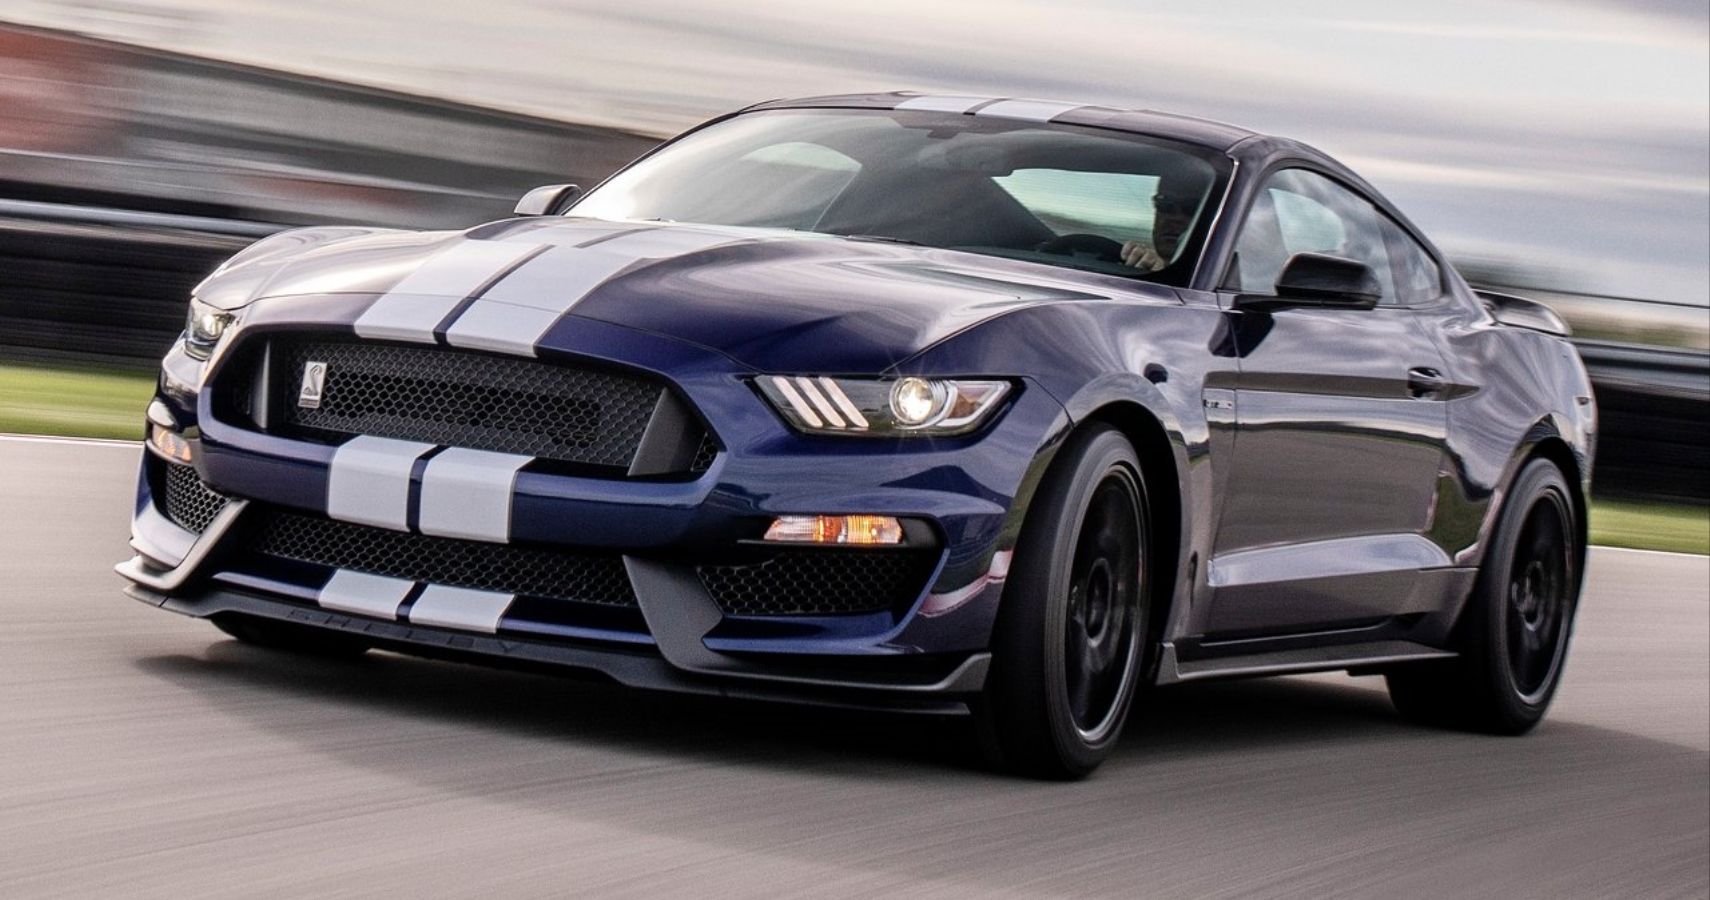 2020 Shelby GT350 Front Quarter View Blue And White Stripes